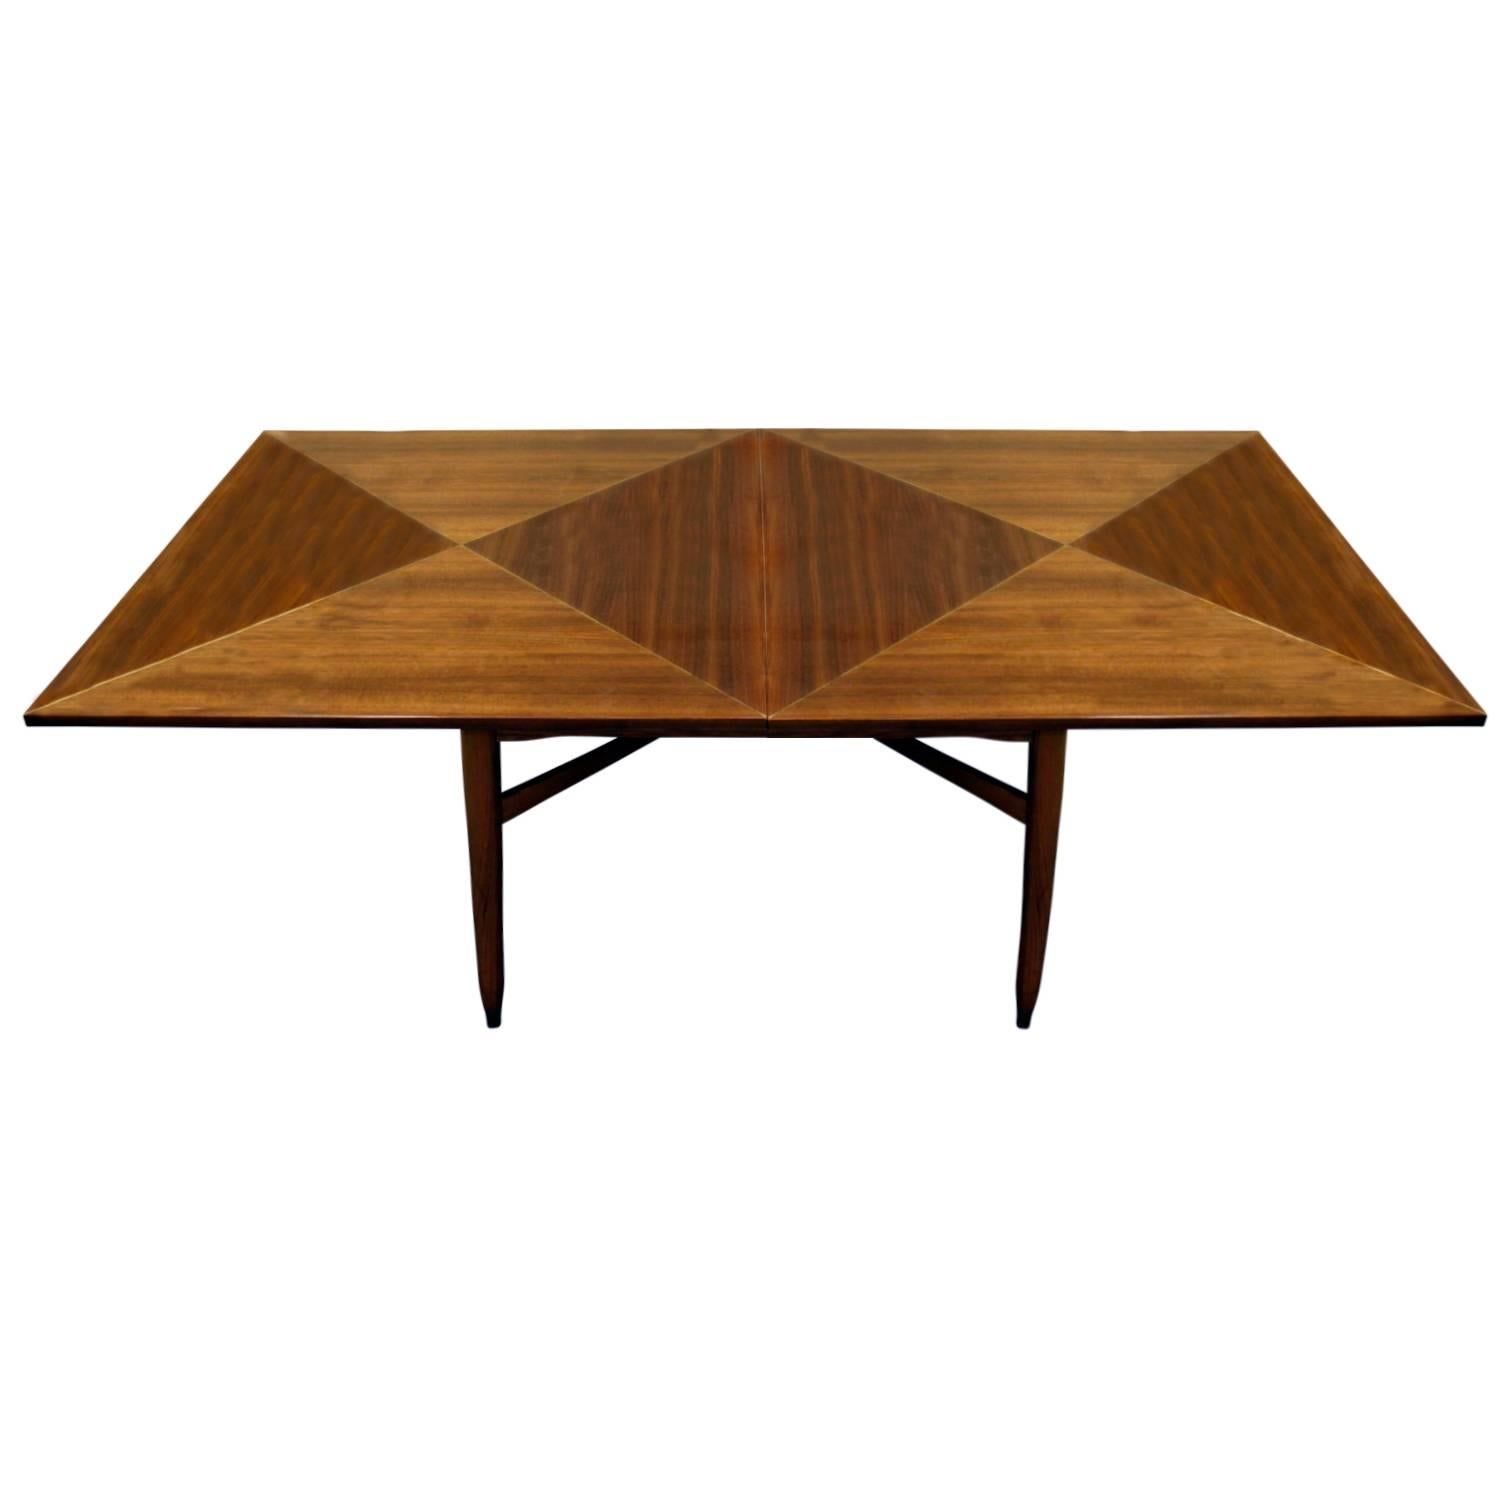 American Tommi Parzinger Rare Flip-Top Game Table 1950s